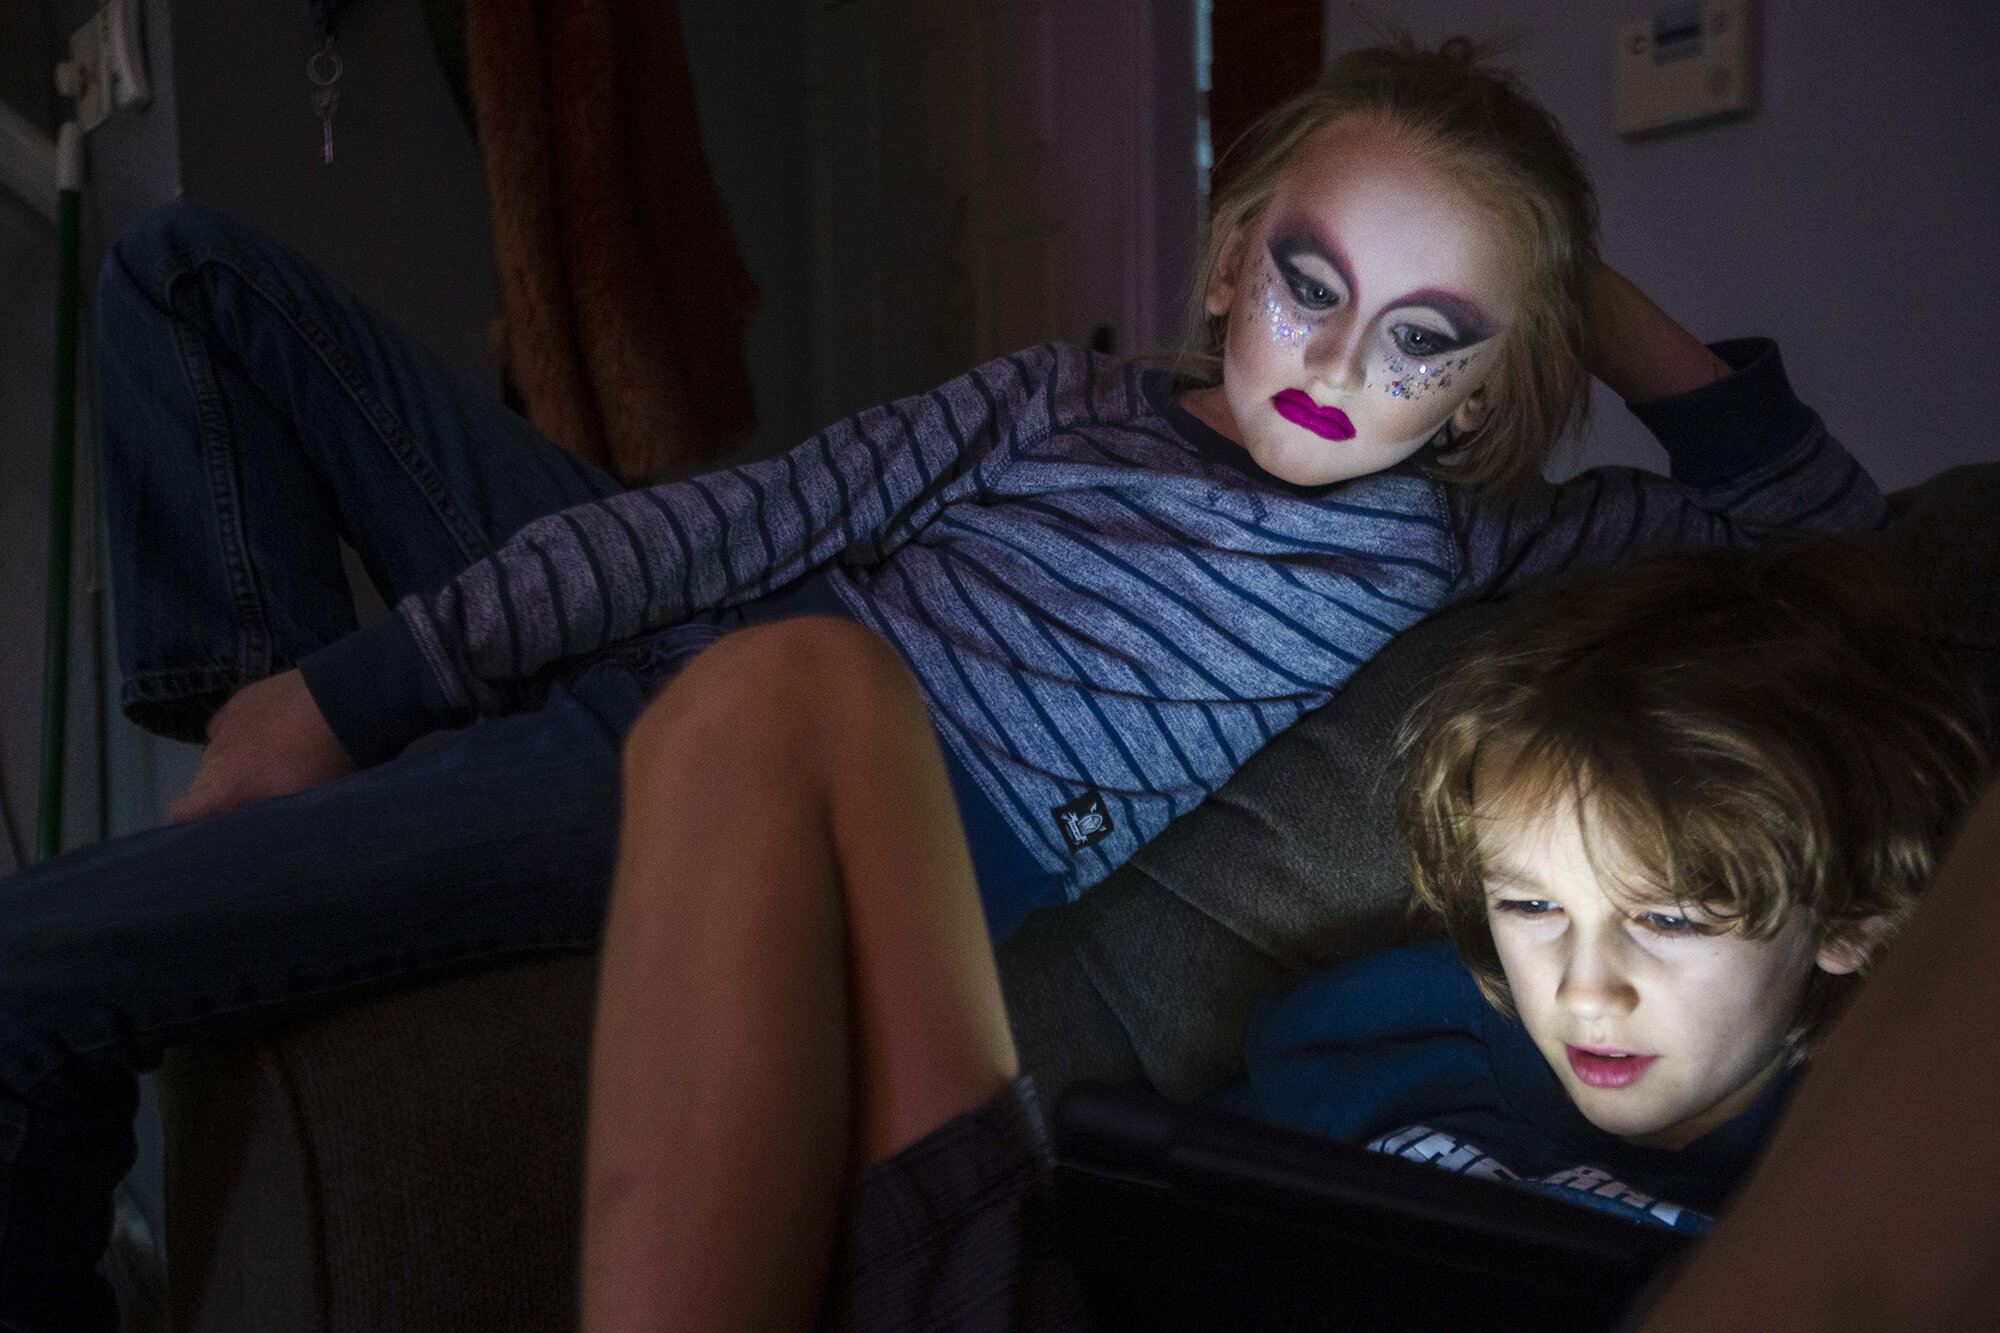  Keegan, a gender creative child, then 8, left, and his brother Noah, 10, right, play video games during a drag lesson at the home of Keegan's drag queen mentors, Robby and Alex in Austin, Texas, U.S., Nov. 15, 2018. 